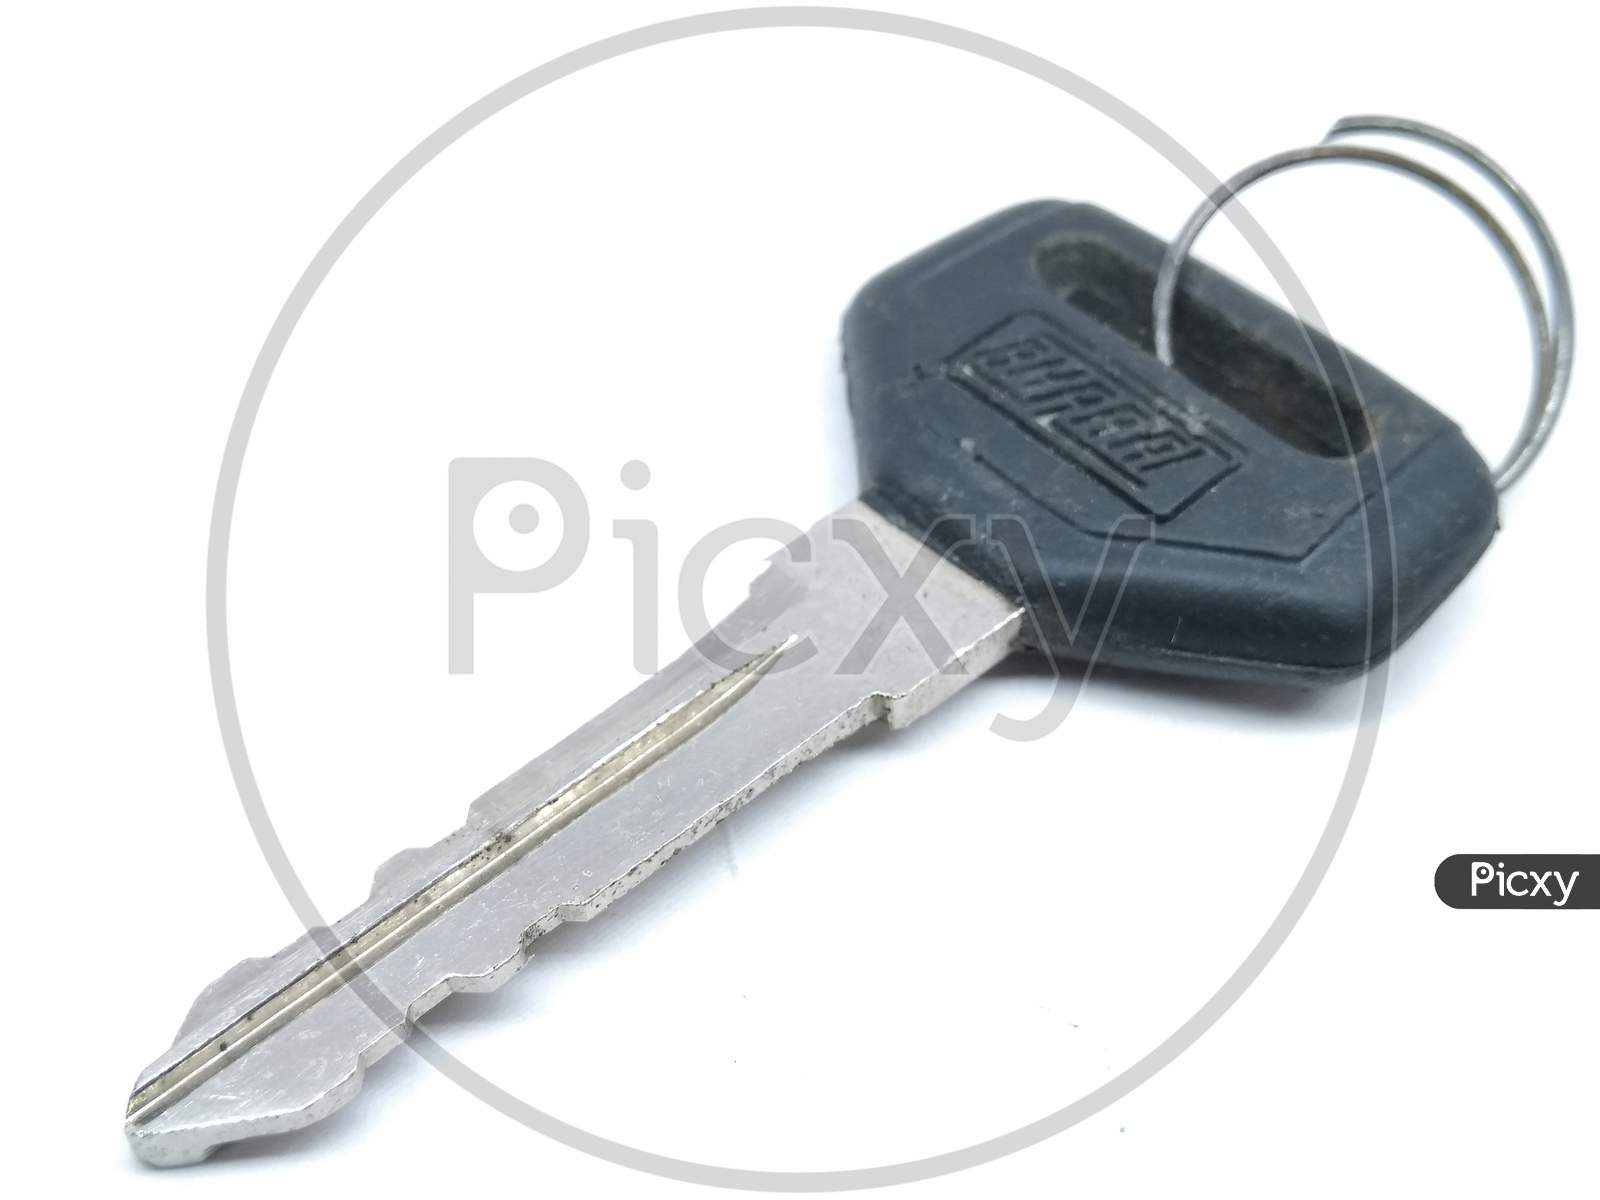 Bike Key Closeup Over an Isolated White Background